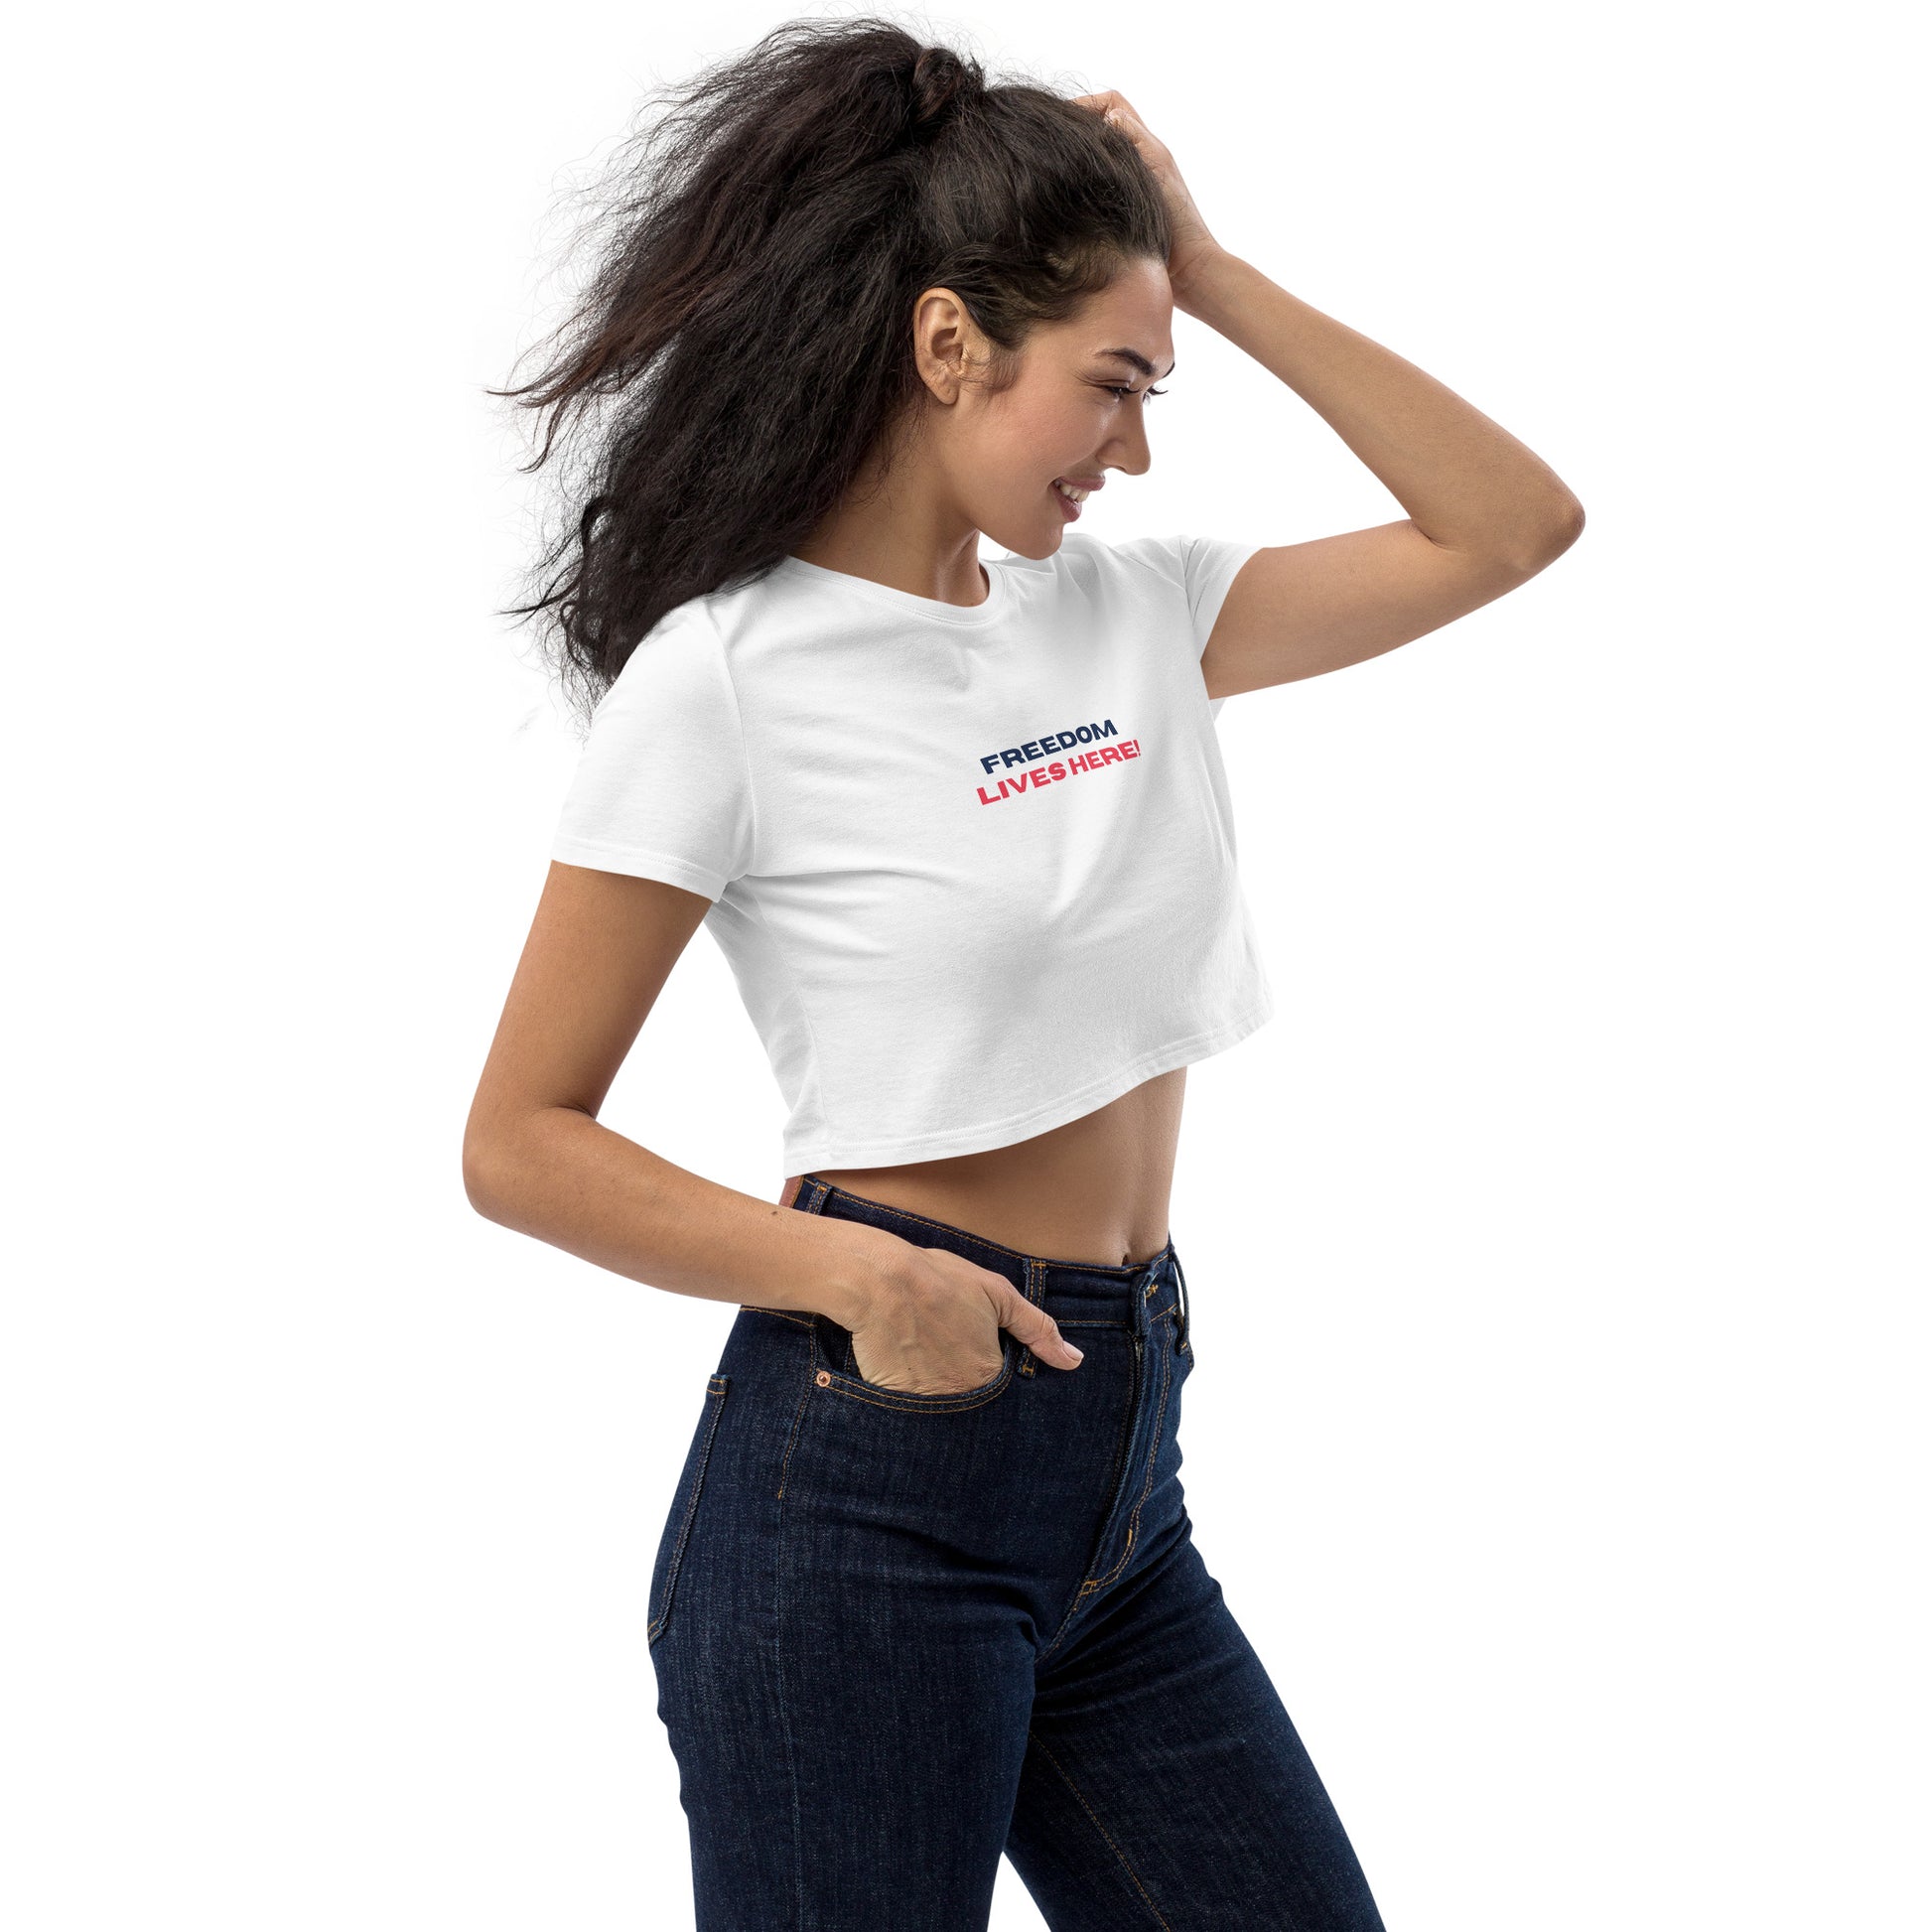 ORGANIC CROP TOP "FREEDOM LIVES HERE" WHITE RIGHT FRONT - www.firstamericanstore.com